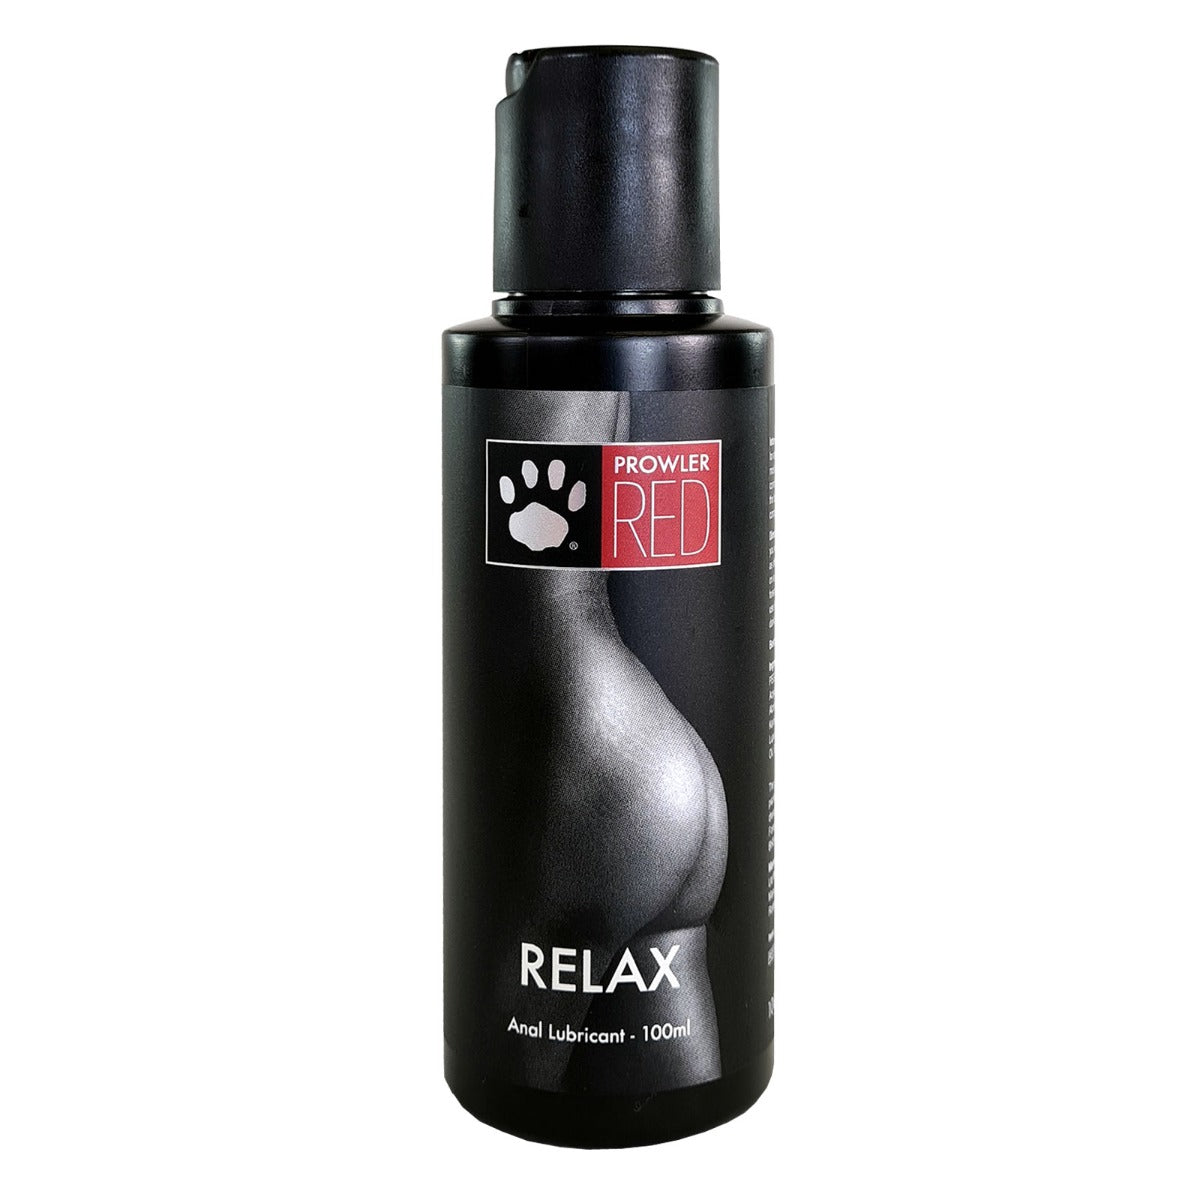 PROWLER RED Relax, 100ml